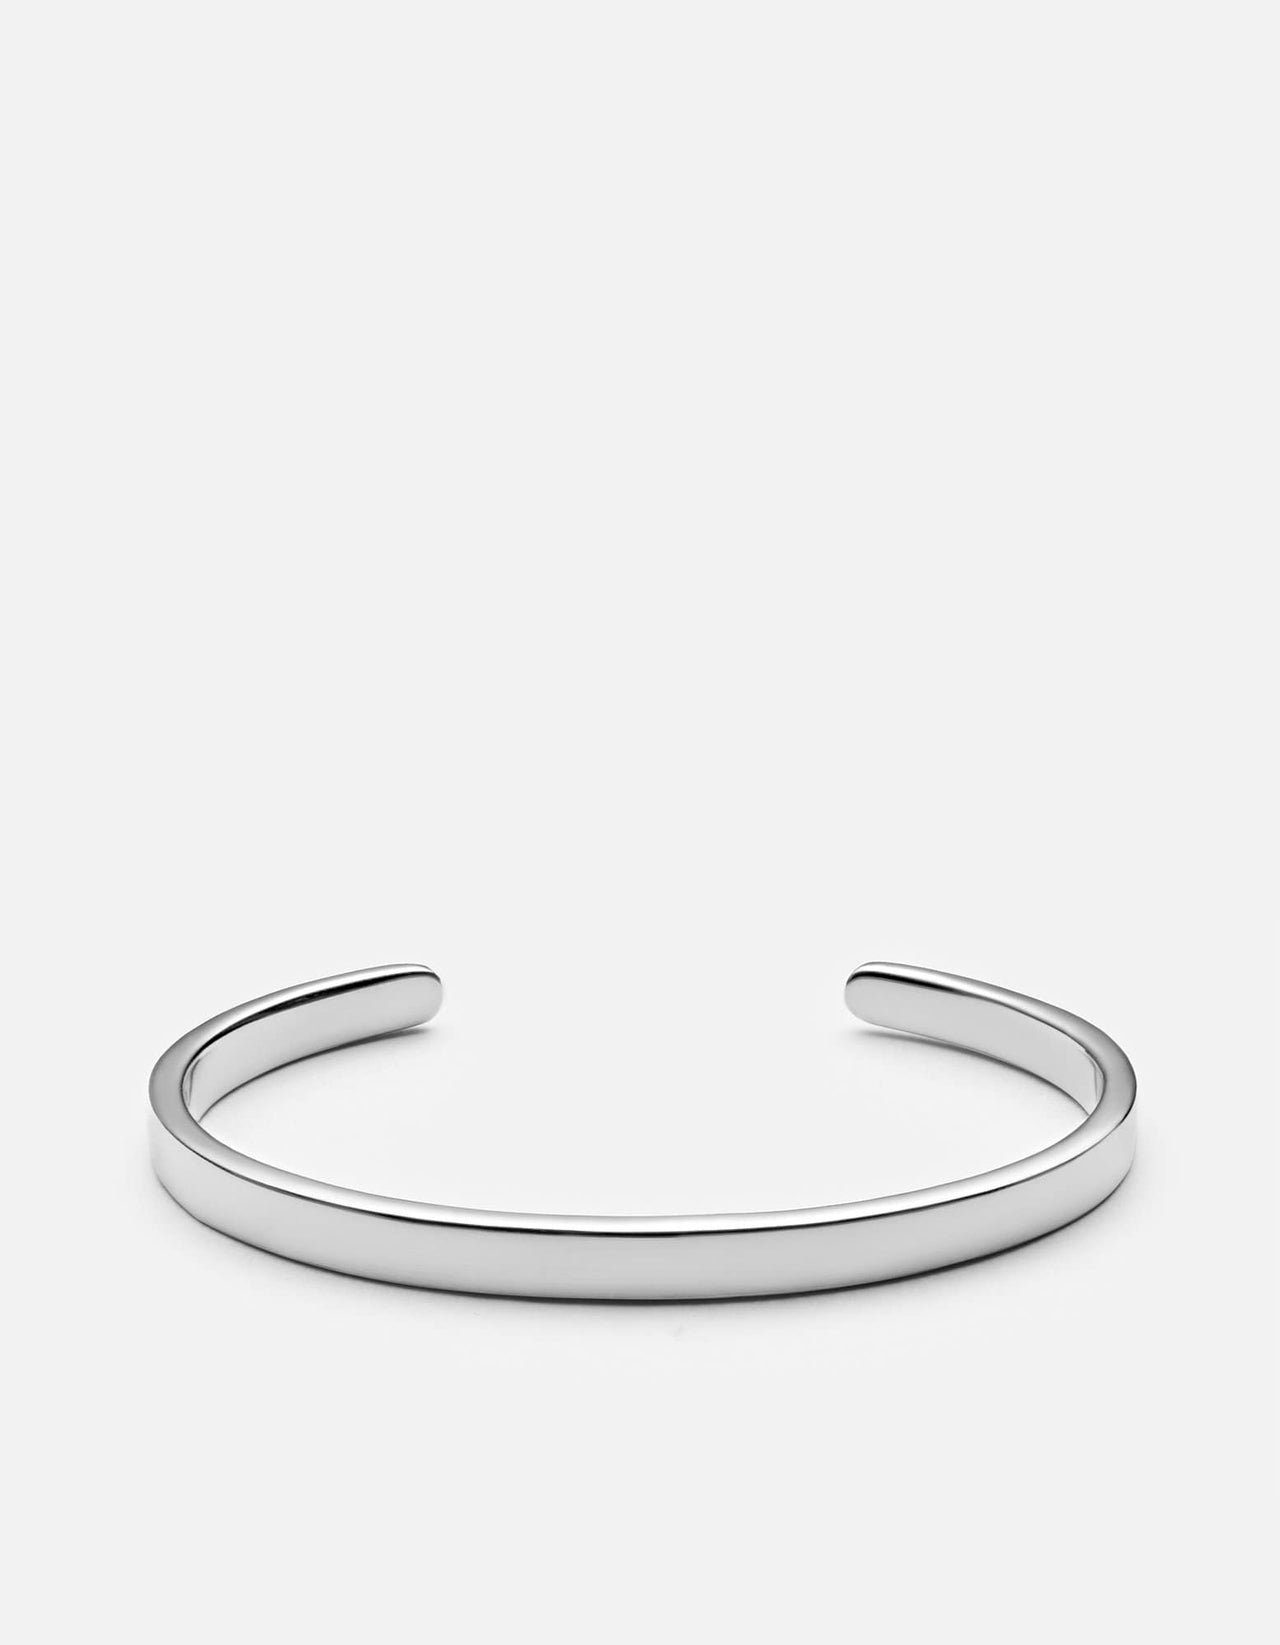 Calvin Klein Jewelry Men's Chain Bracelet, Color: Silver (Model: 35000132),  Medium, Stainless Steel, no gemstone : Amazon.ca: Clothing, Shoes &  Accessories